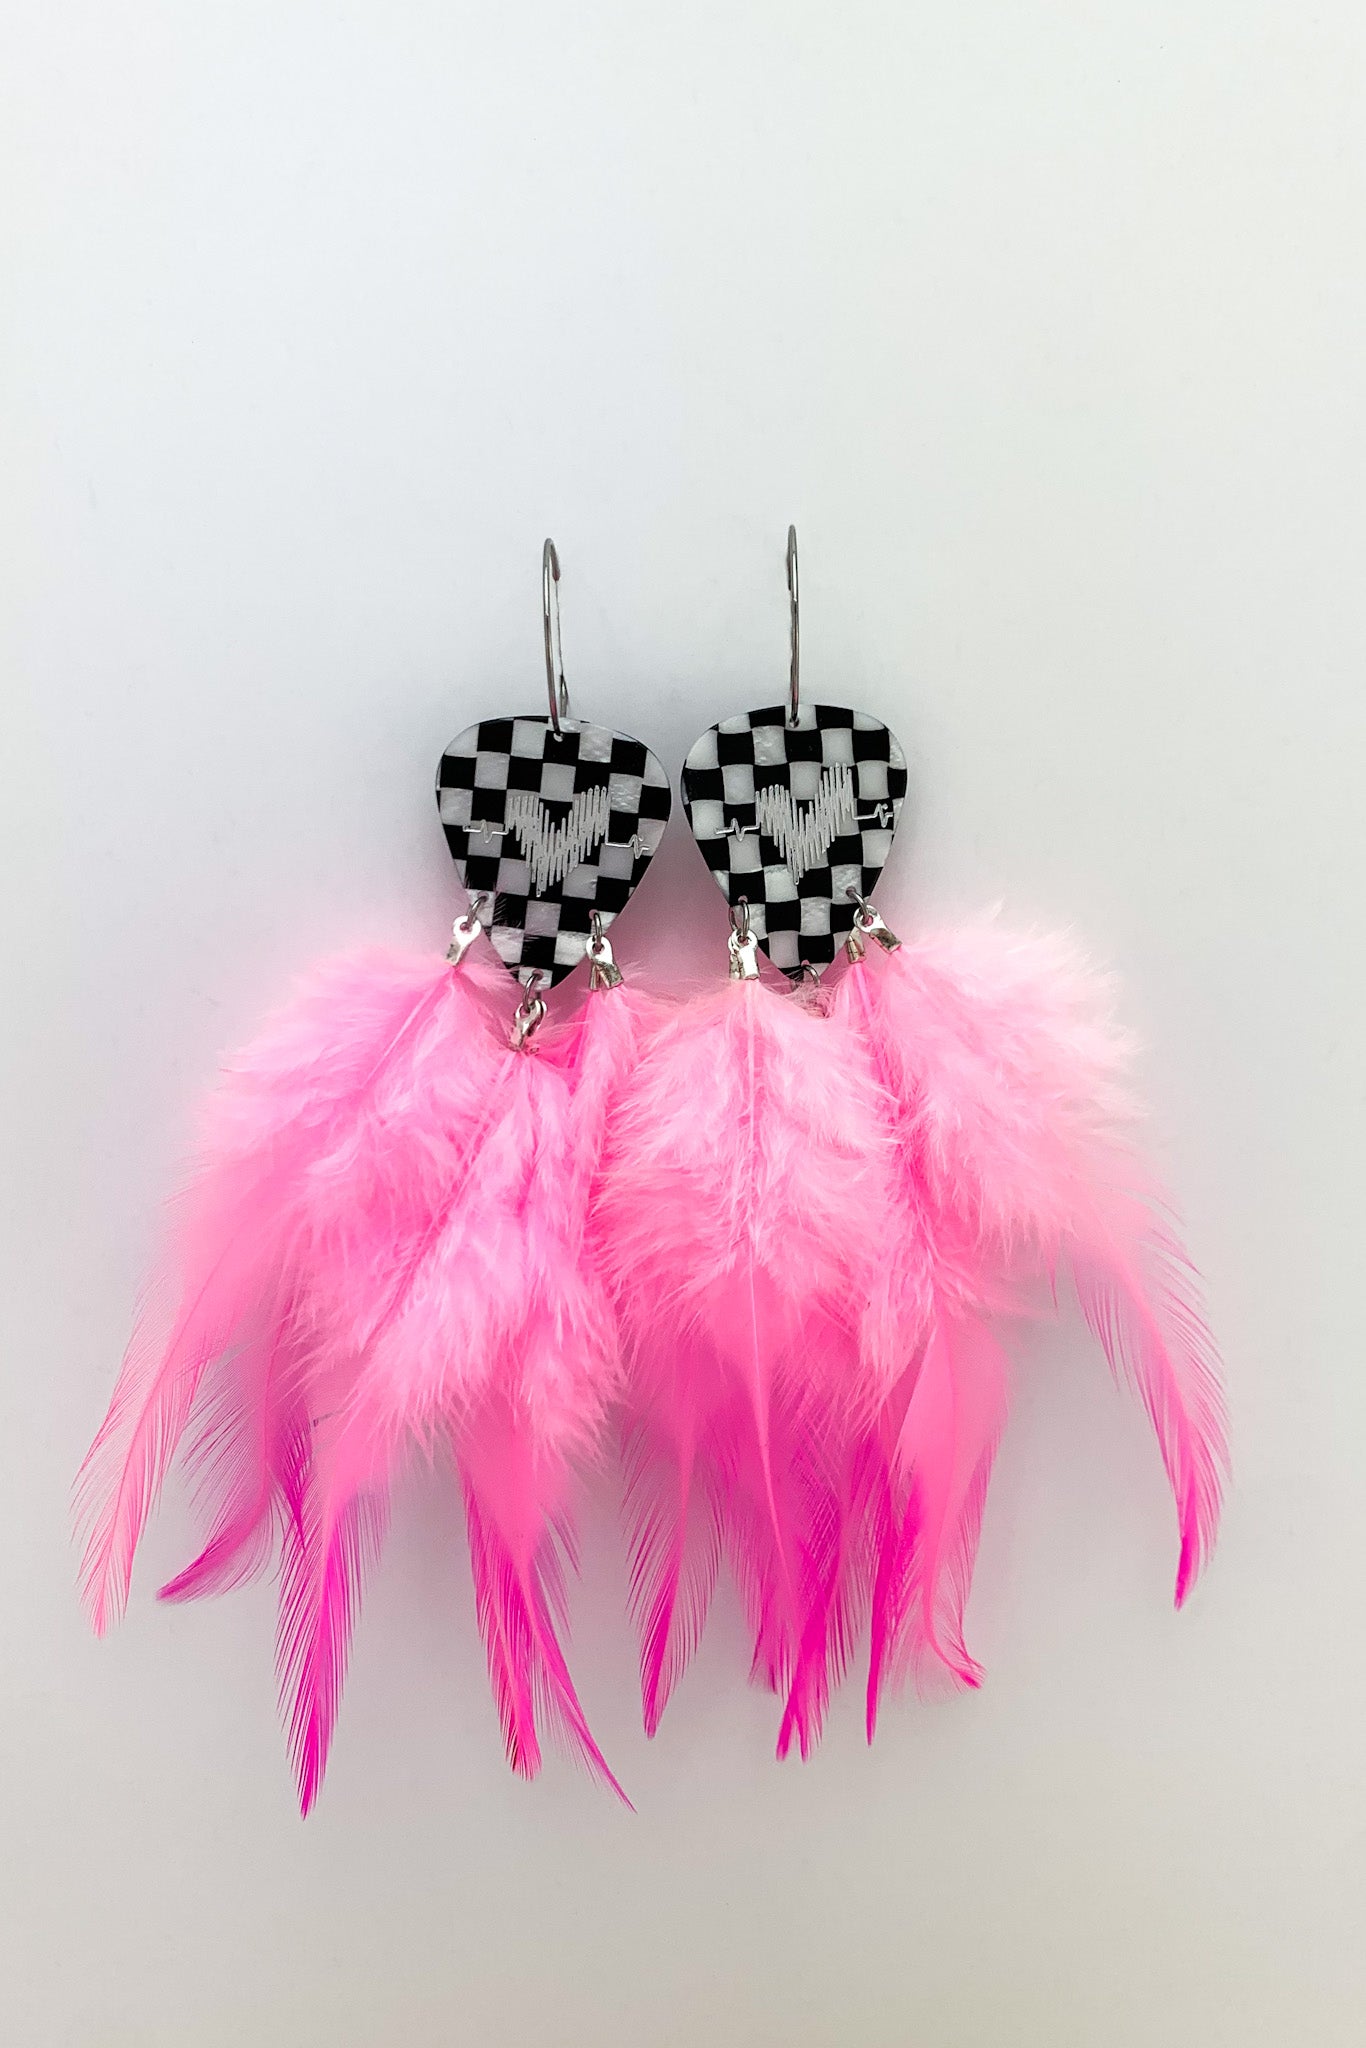 Groupie Love Checkerboard Silver Pink Feather Guitar Pick Earrings